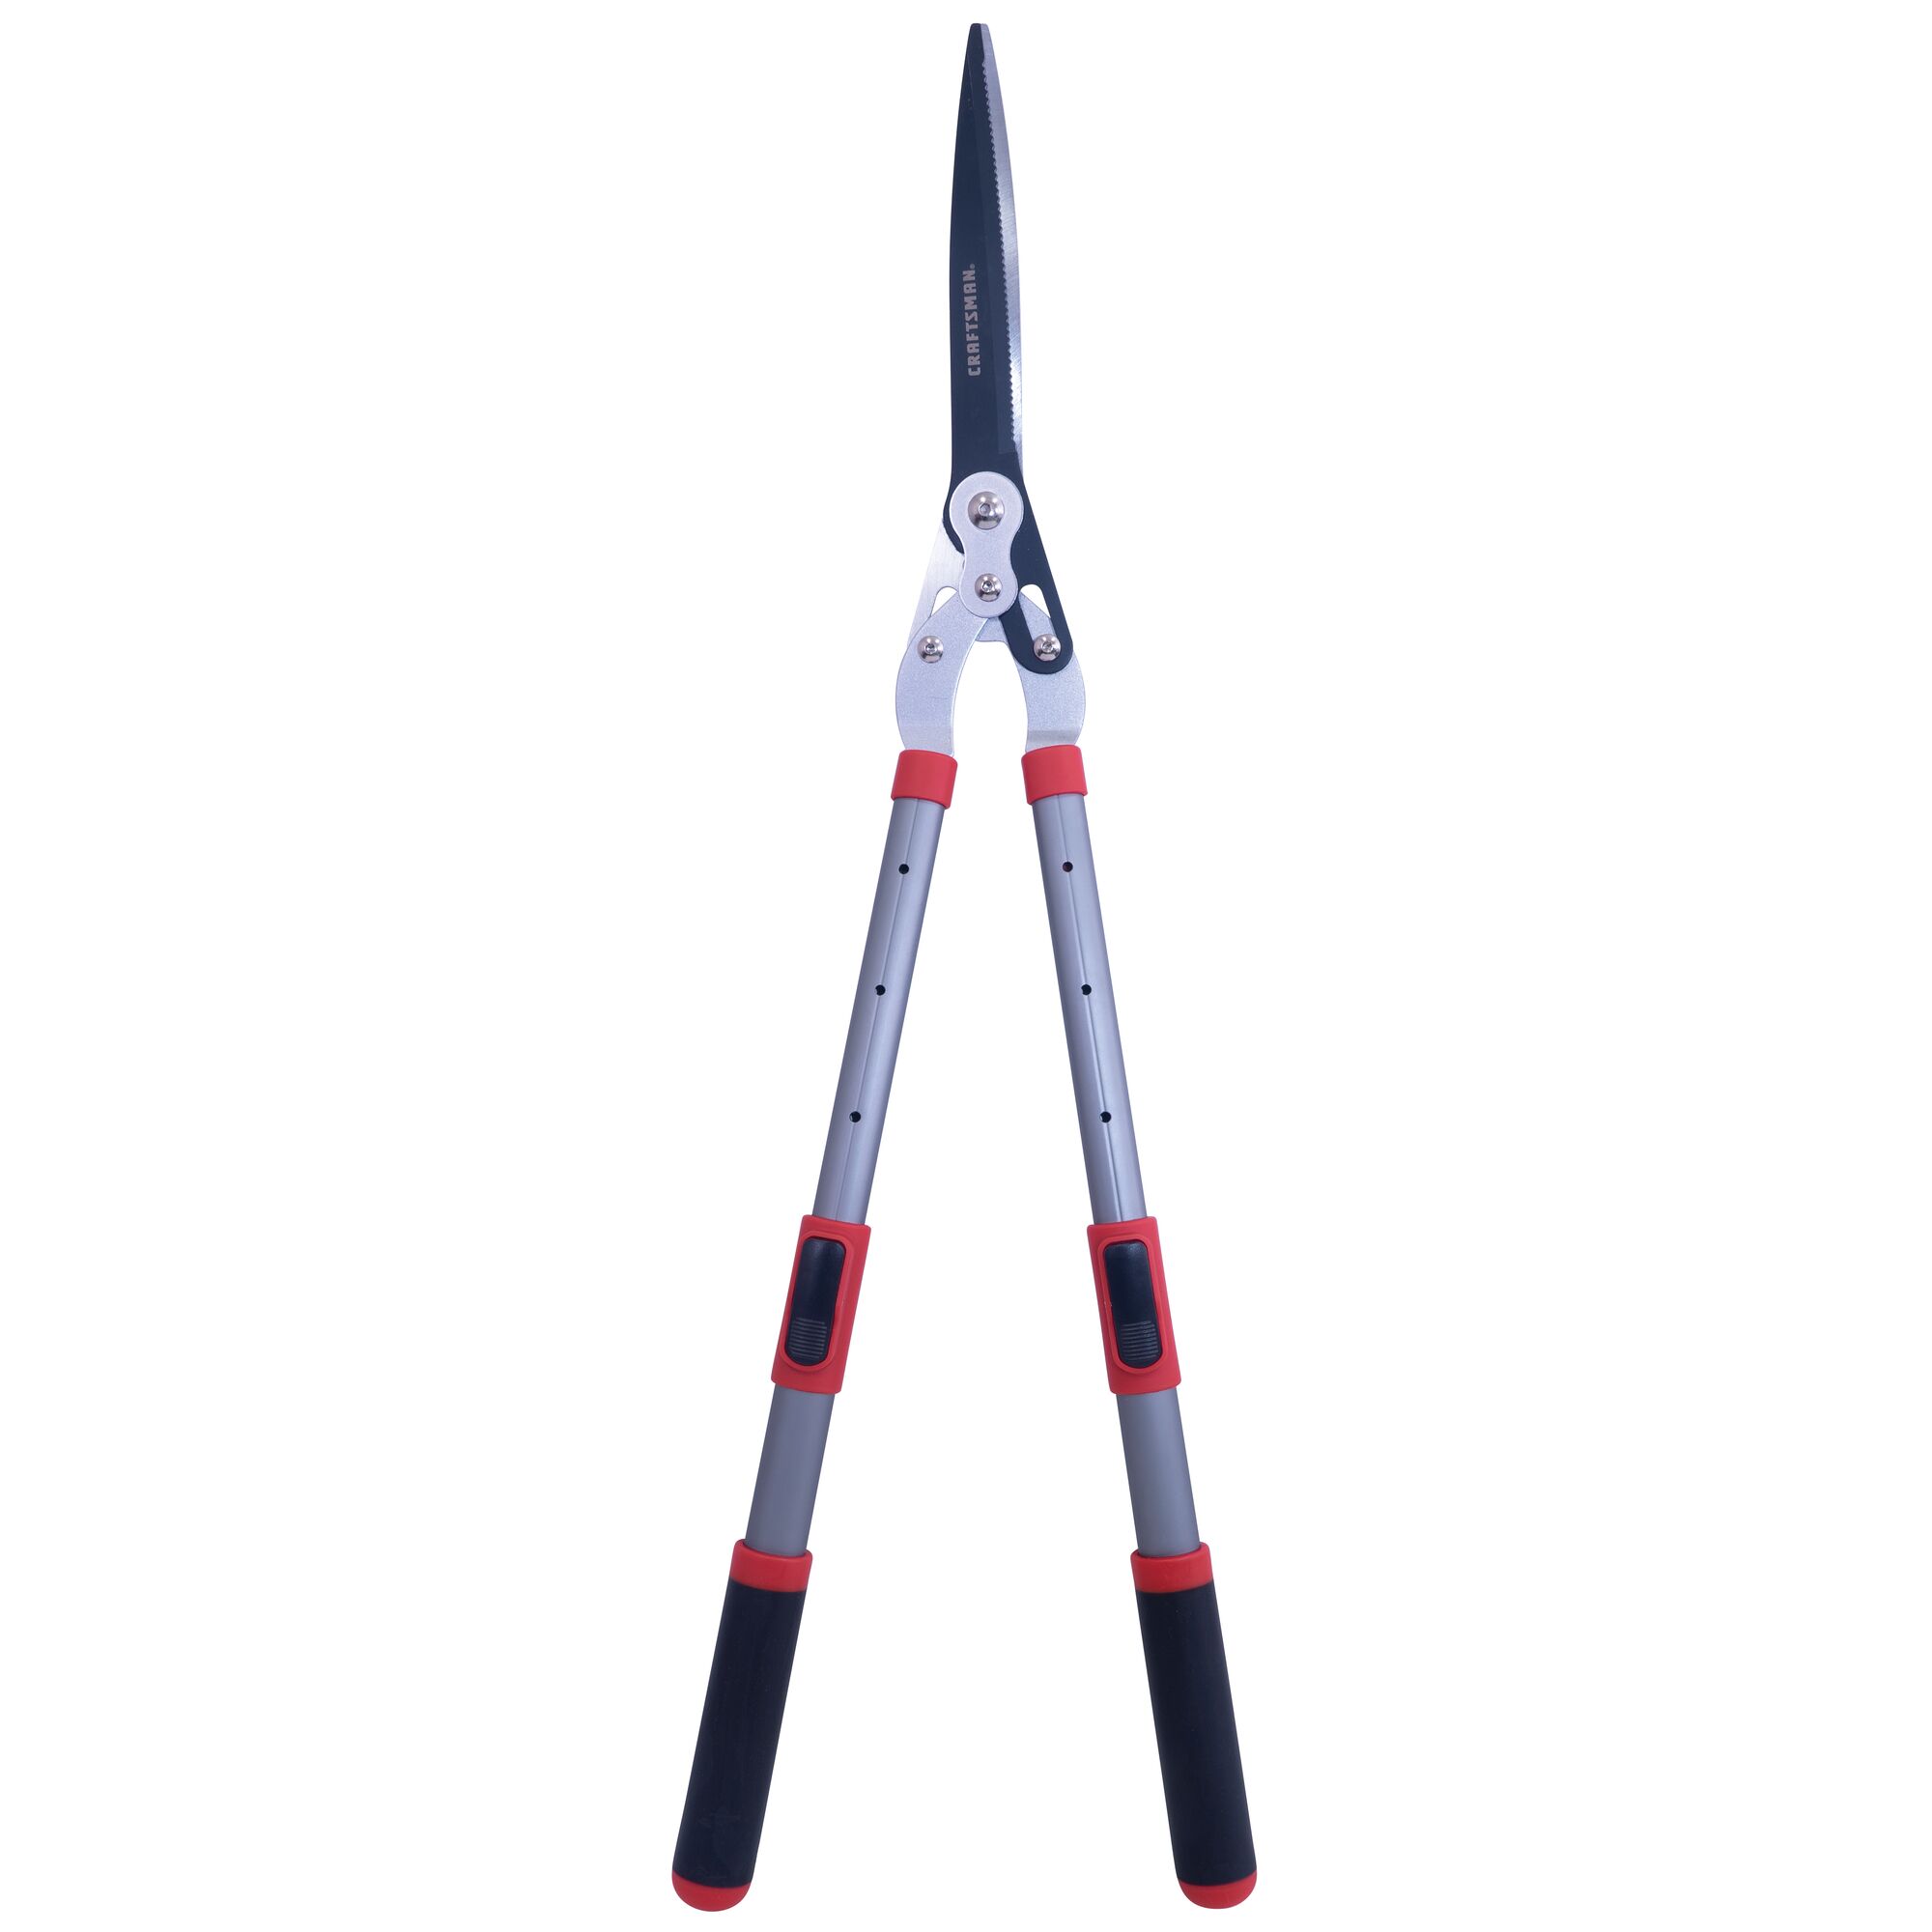 Hedge shears with compound action blade and telescoping handles.